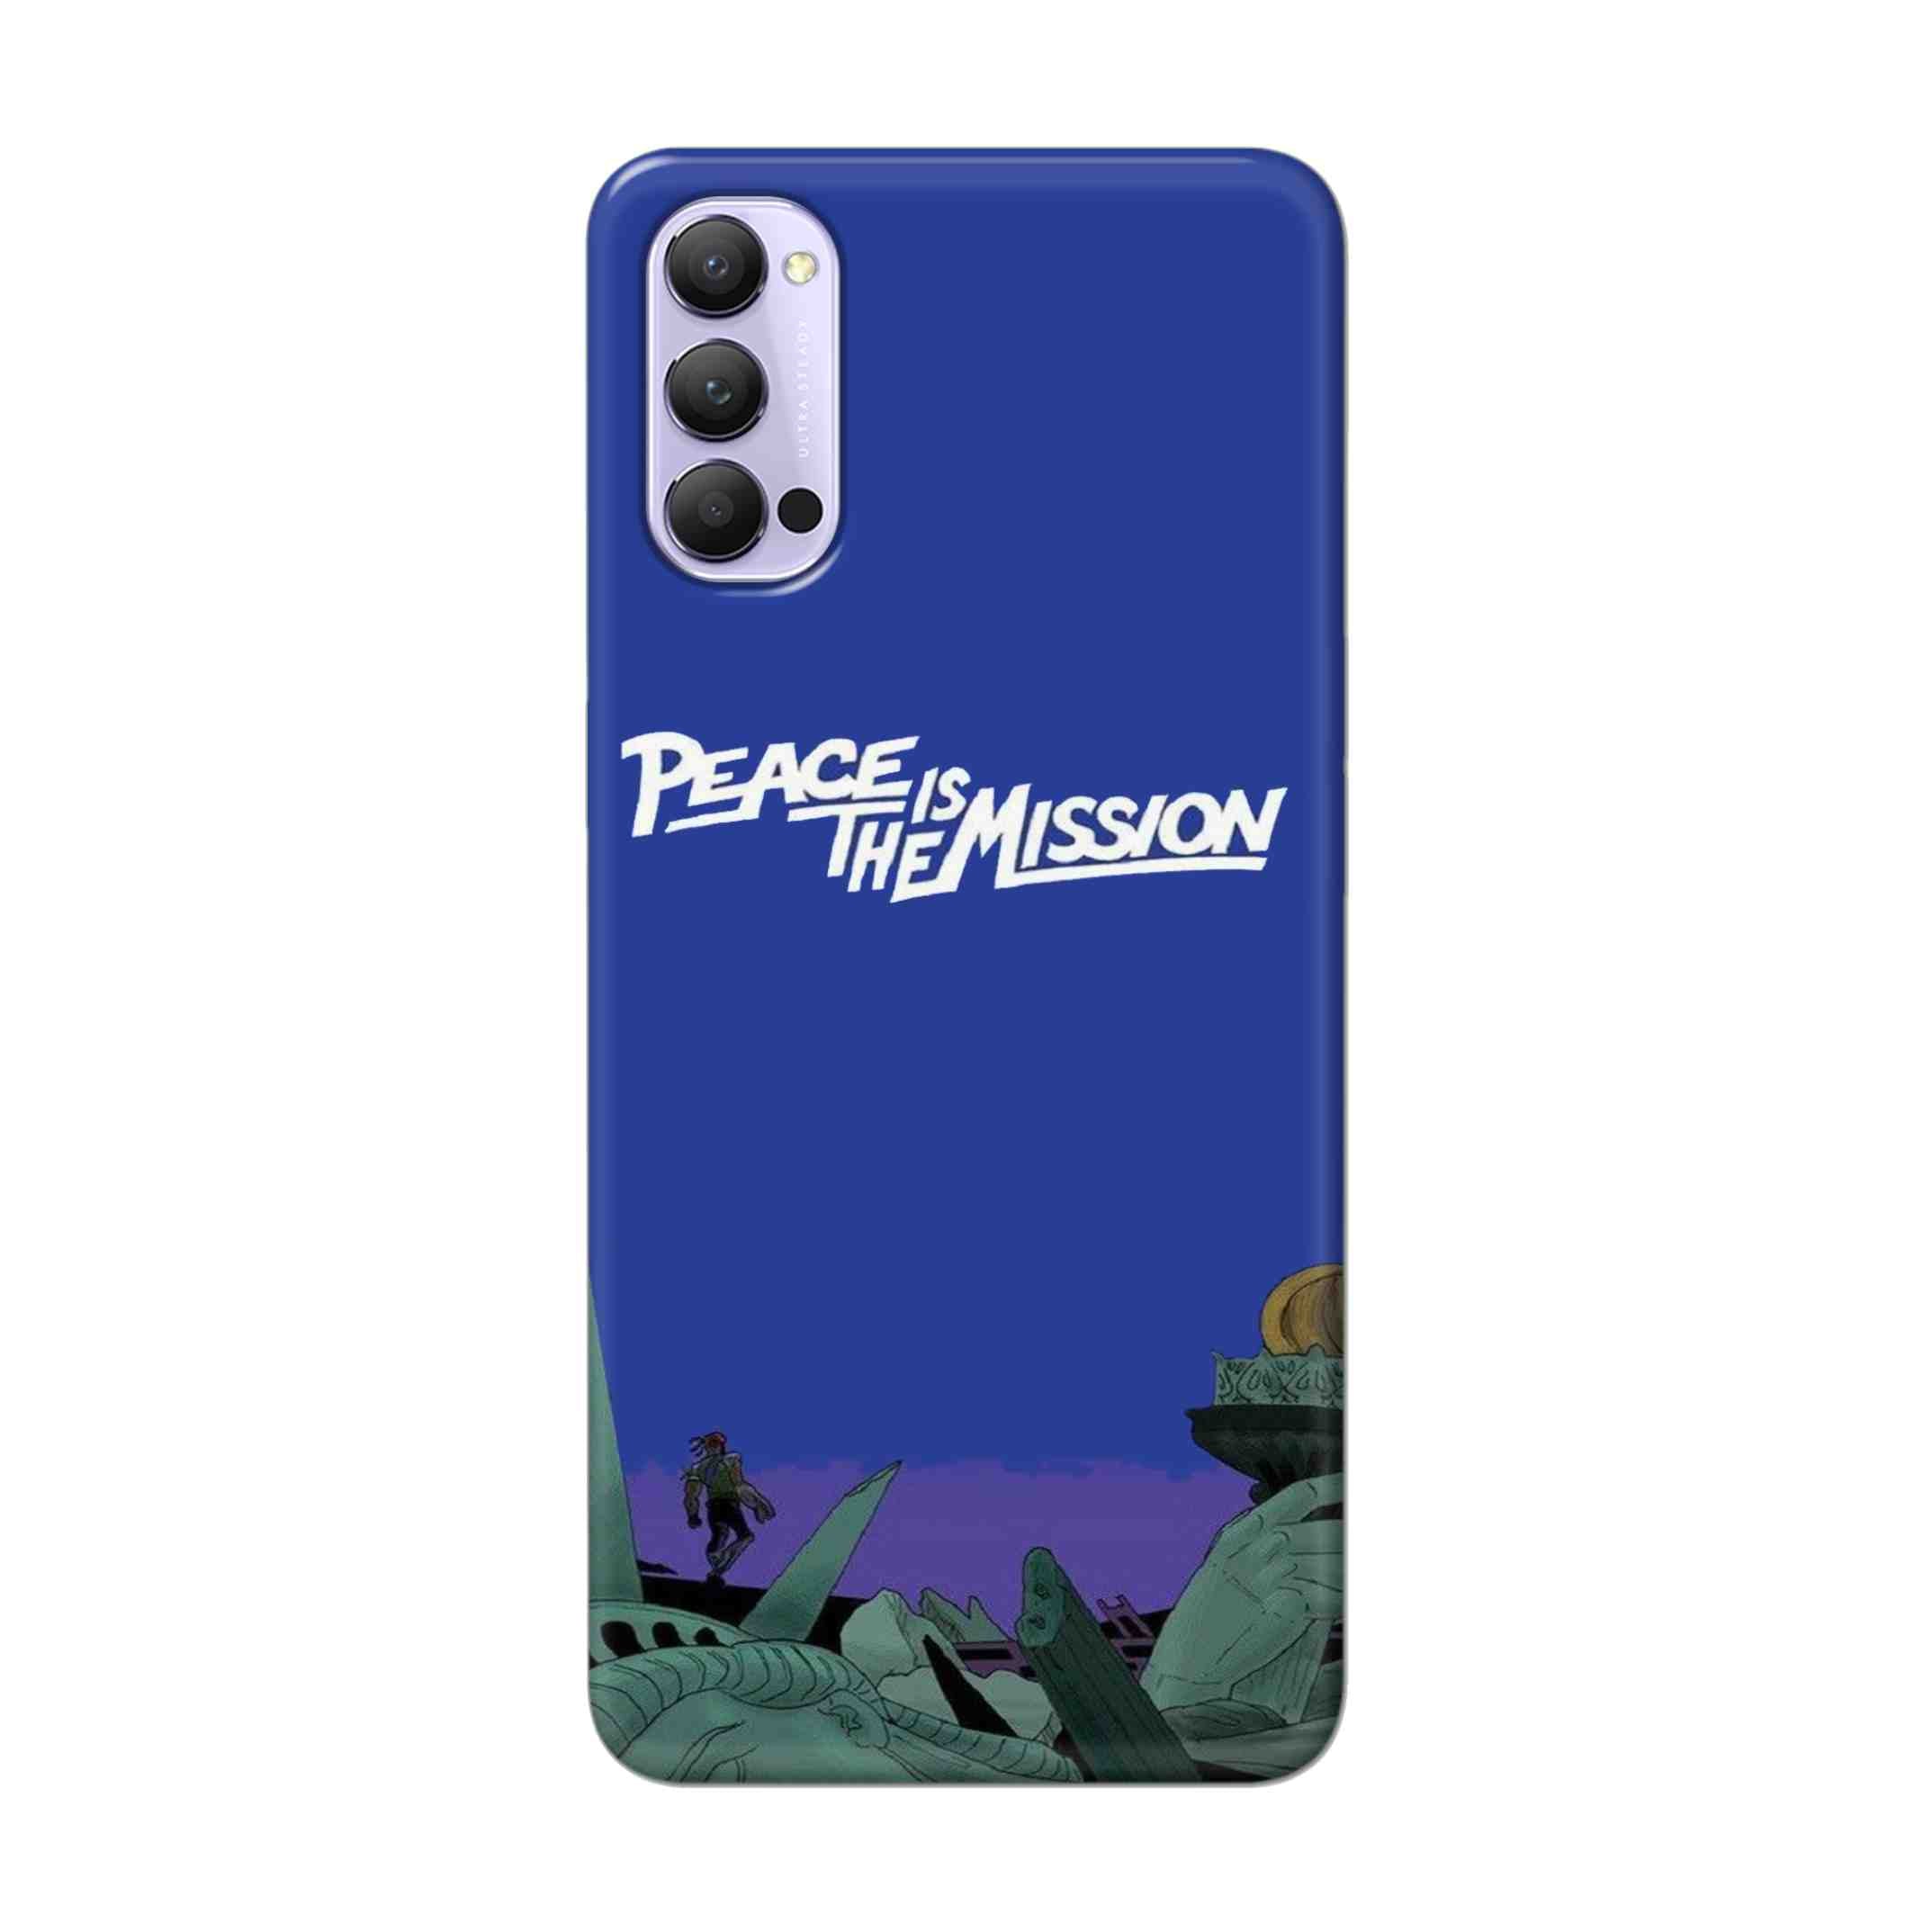 Buy Peace Is The Misson Hard Back Mobile Phone Case Cover For Oppo Reno 4 Pro Online